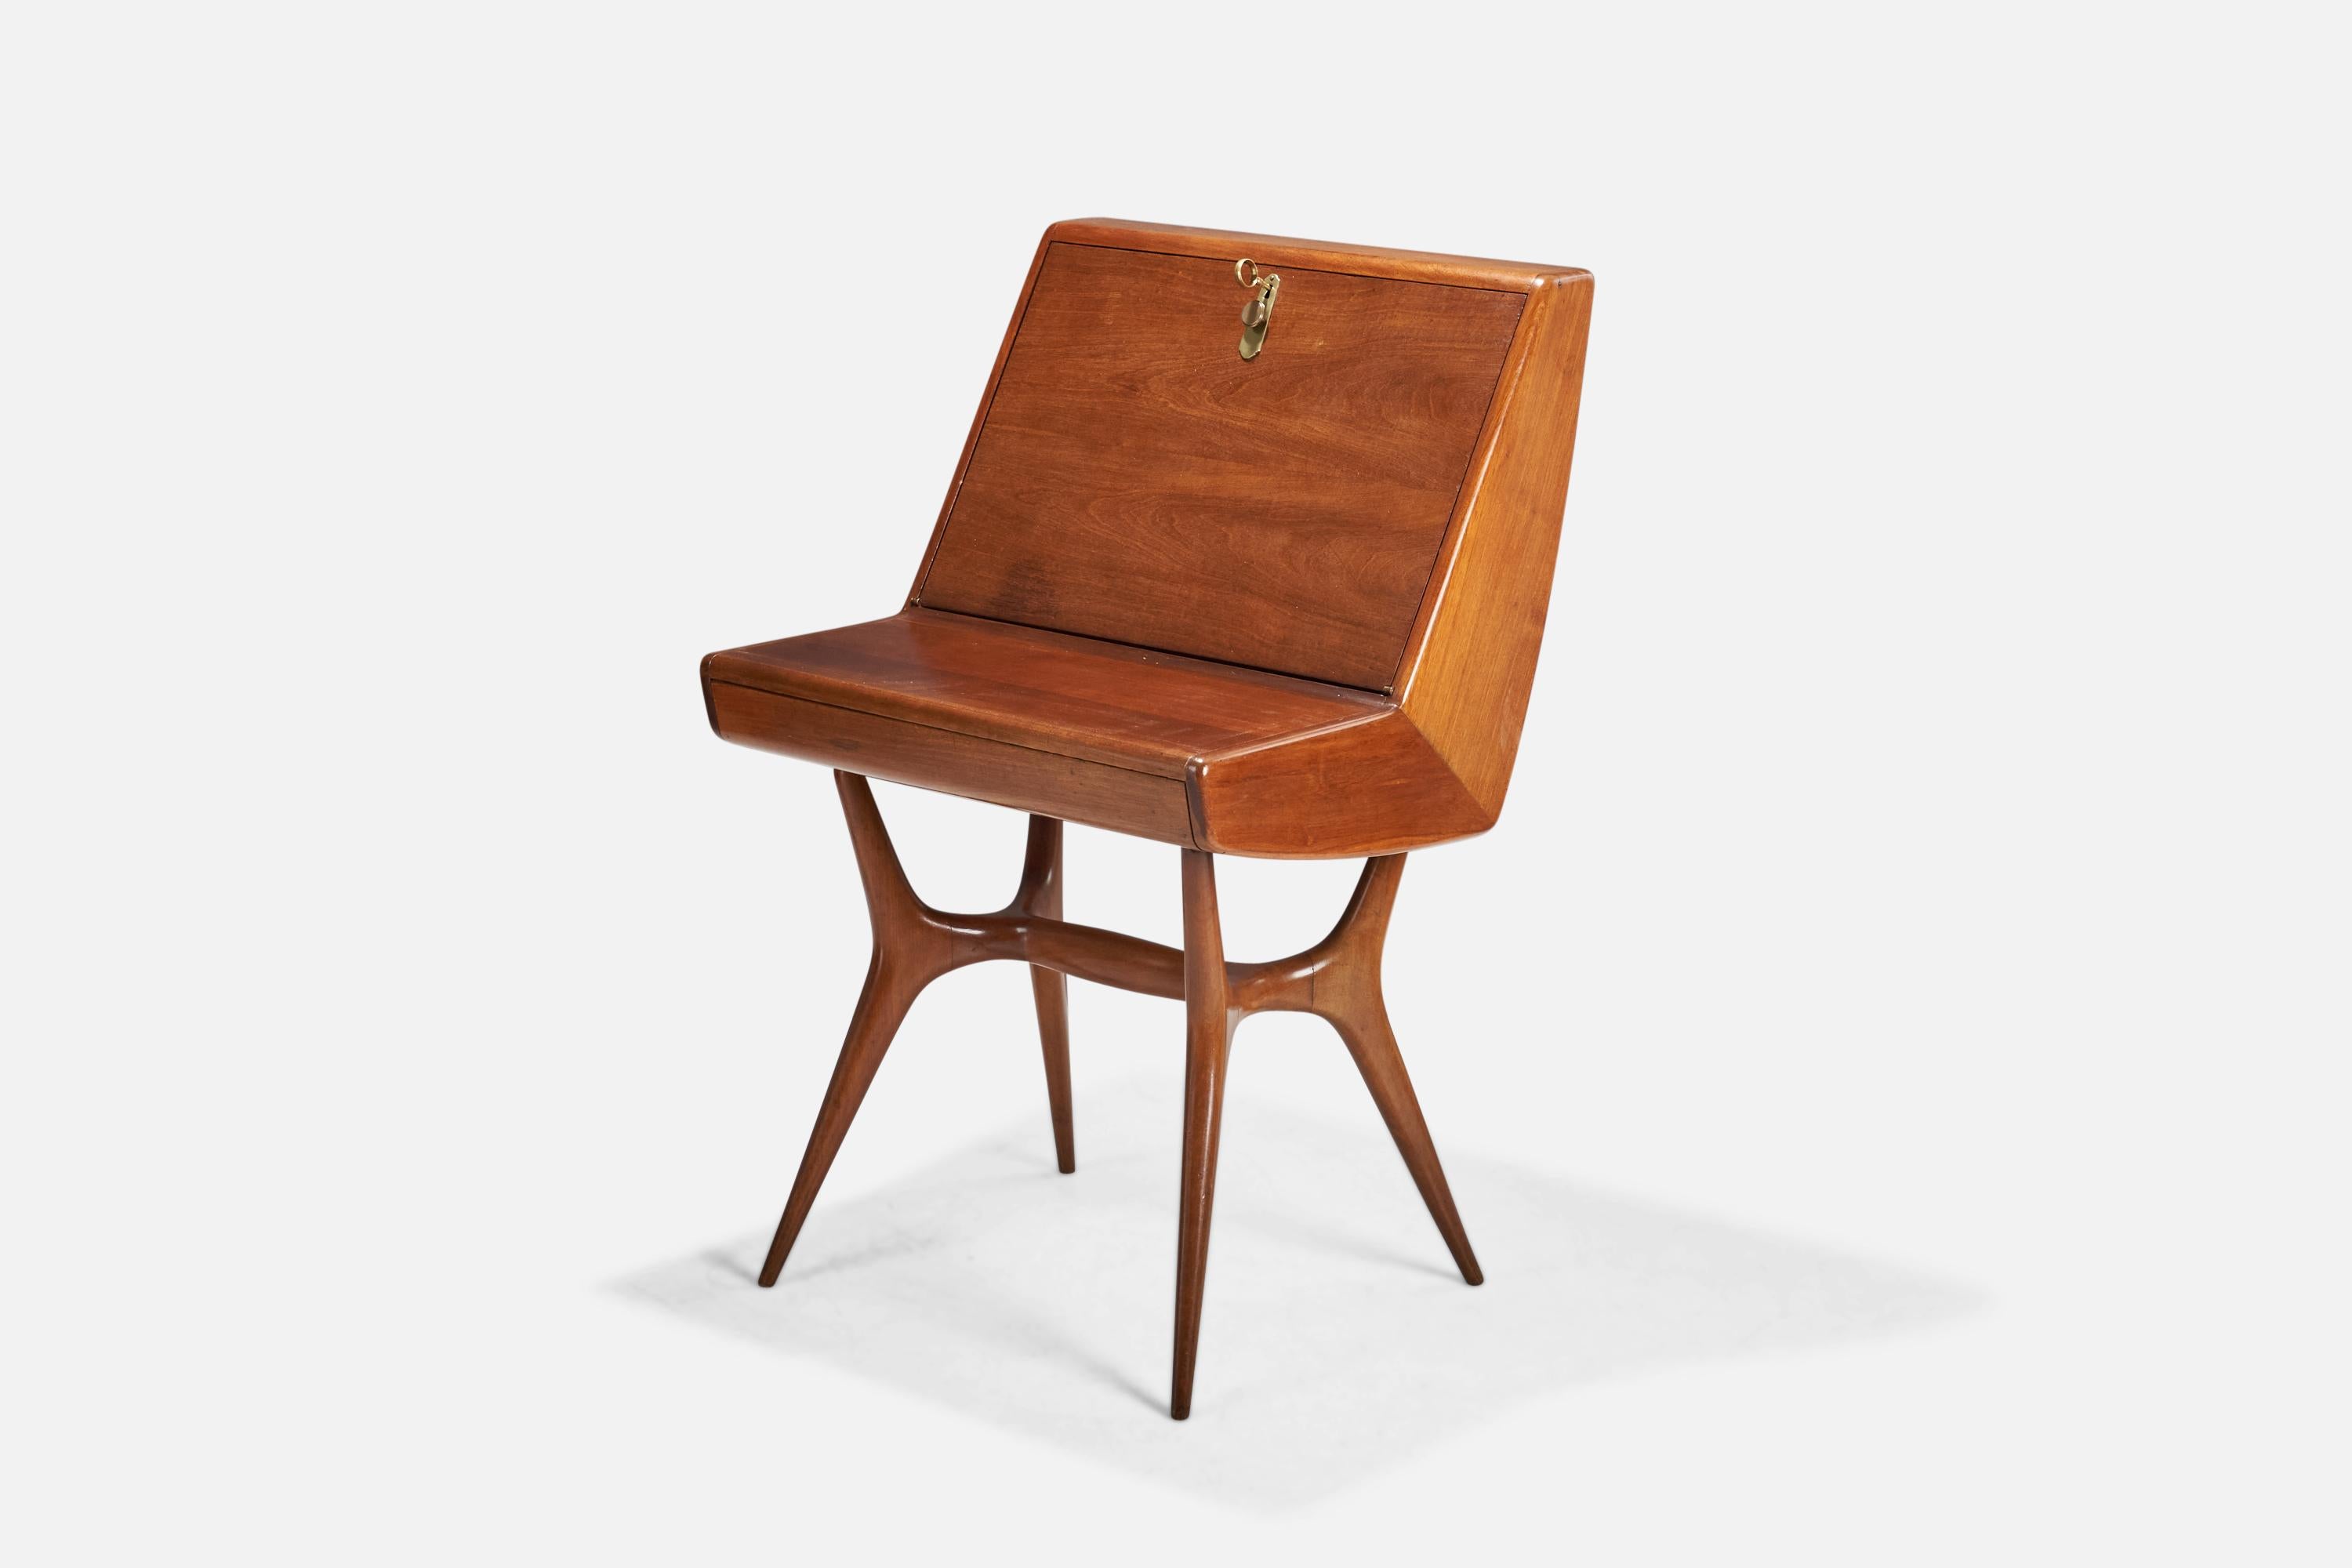 A teak and brass desk or secretaire designed and produced by an Italian Designer, Italy, 1940s.